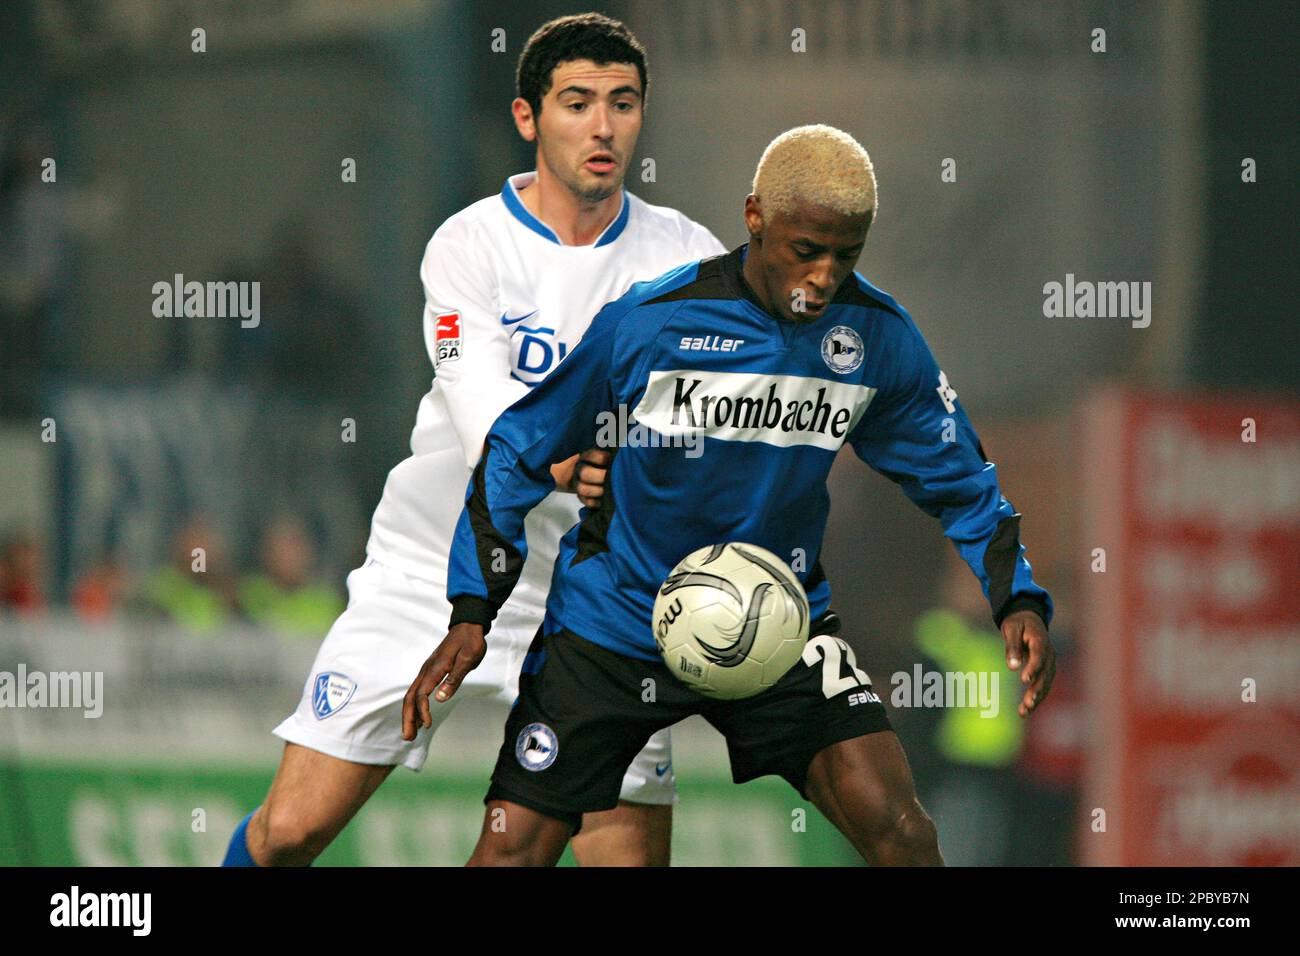 Bielefeld's Sibusiso Zuma, from South Africa, fights for the ball with Bochum's Anthar Yahia from Algeria, back, during German first division soccer match between Arminia Bielefeld and VfL Bochum at the SchuecoArena stadium in Bielefeld, western Germany, Sunday Feb. 18 2007. (AP Photo/Volker Wiciok) ** NO MOBILE USE UNTIL 2 HOURS AFTER THE MATCH, WEBSITE USERS ARE OBLIGED TO COMPLY WITH DFL-RESTRICTIONS, SEE INSTRUCTIONS FOR DETAILS ** Stock Photo